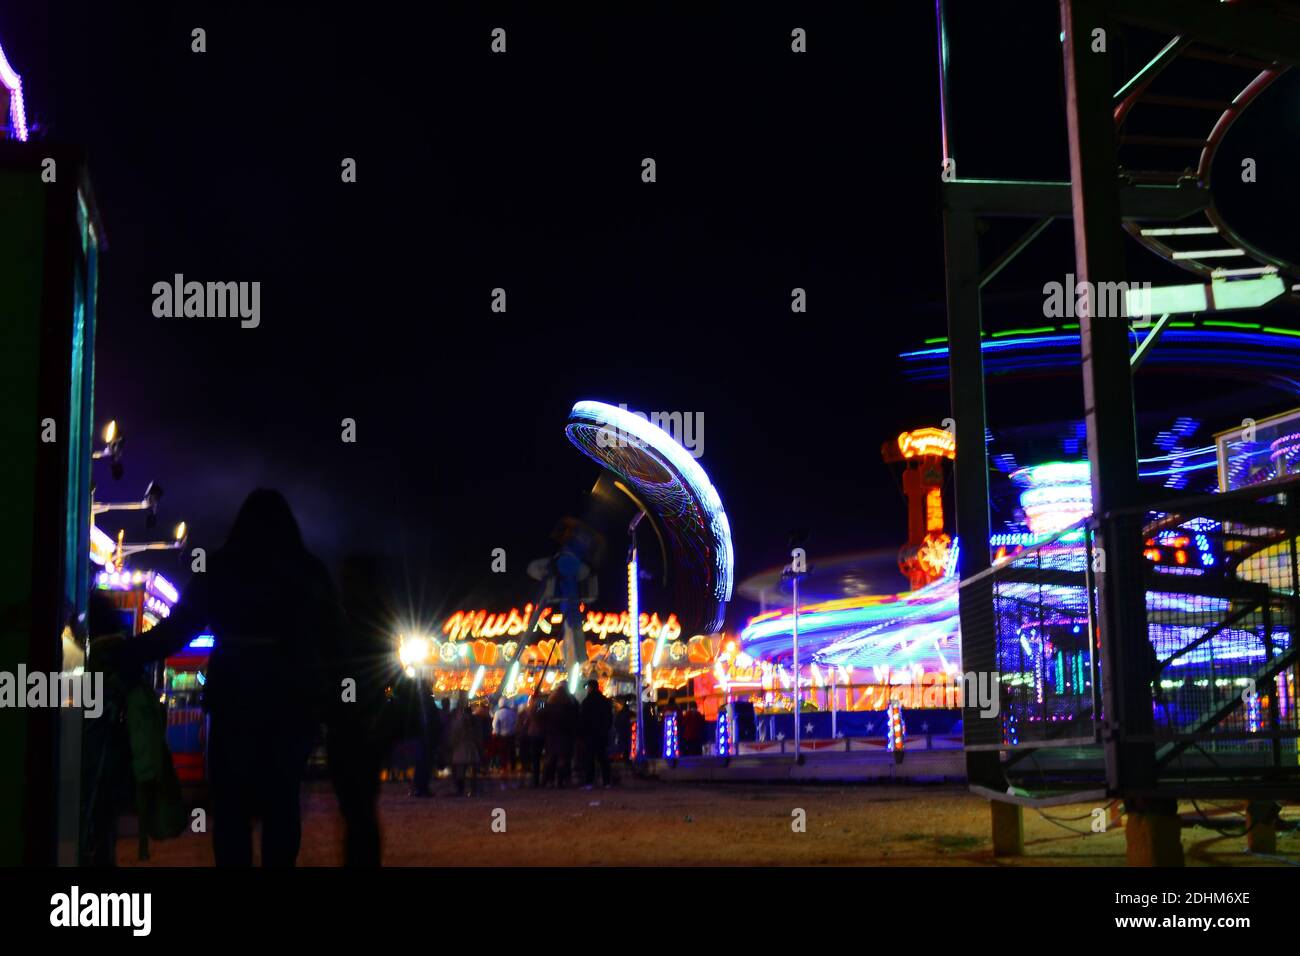 Park with rides at night Stock Photo